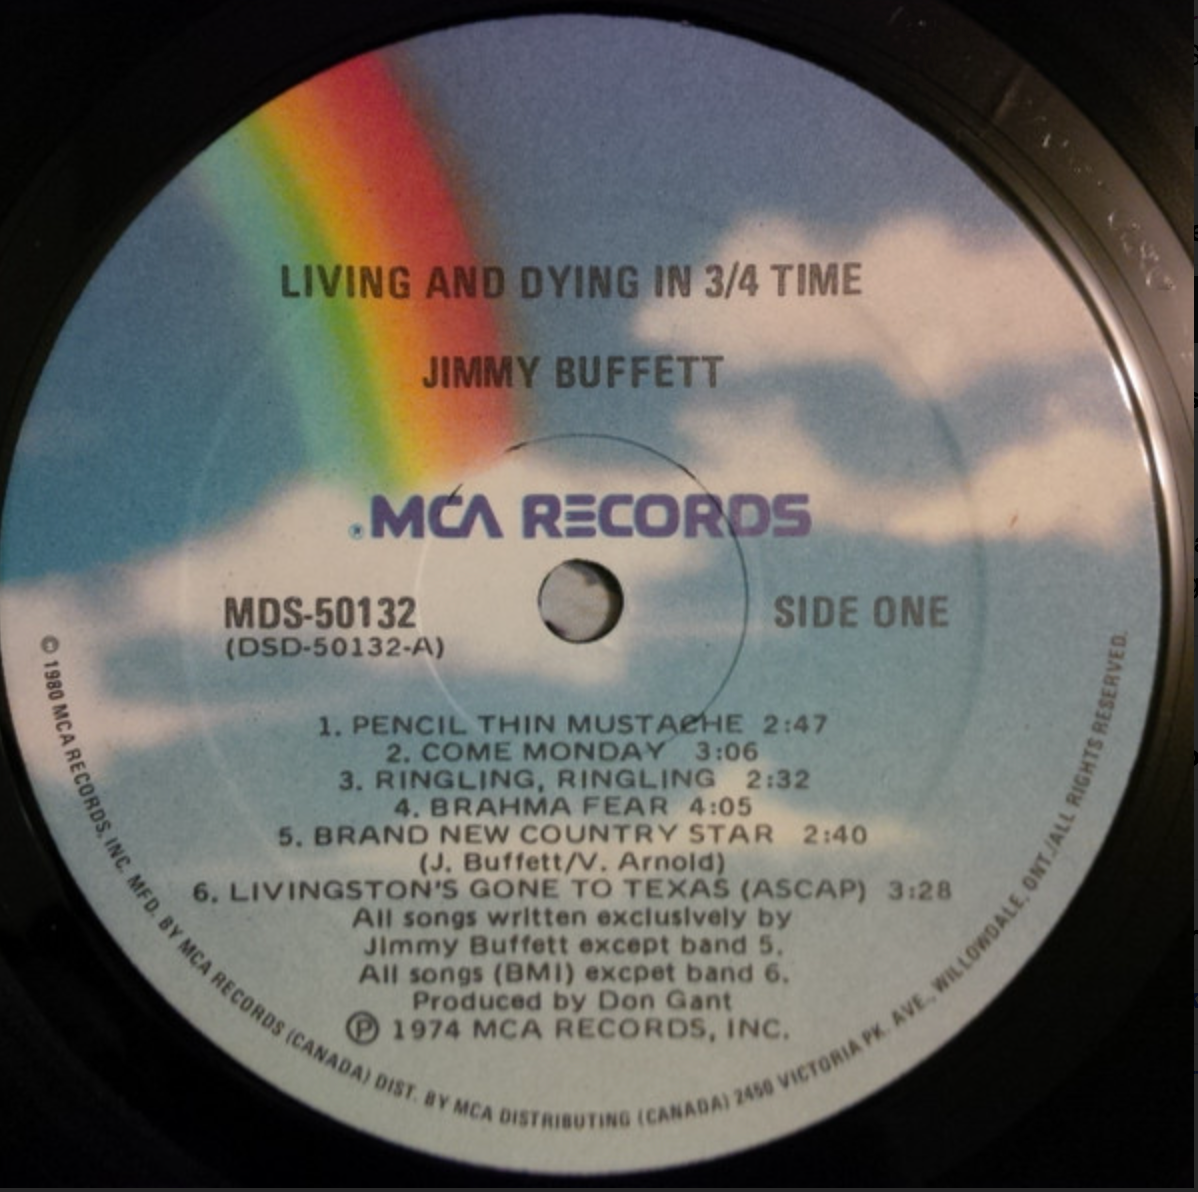 Jimmy Buffett – Living And Dying In 3/4 Time - 1974 US Pressing